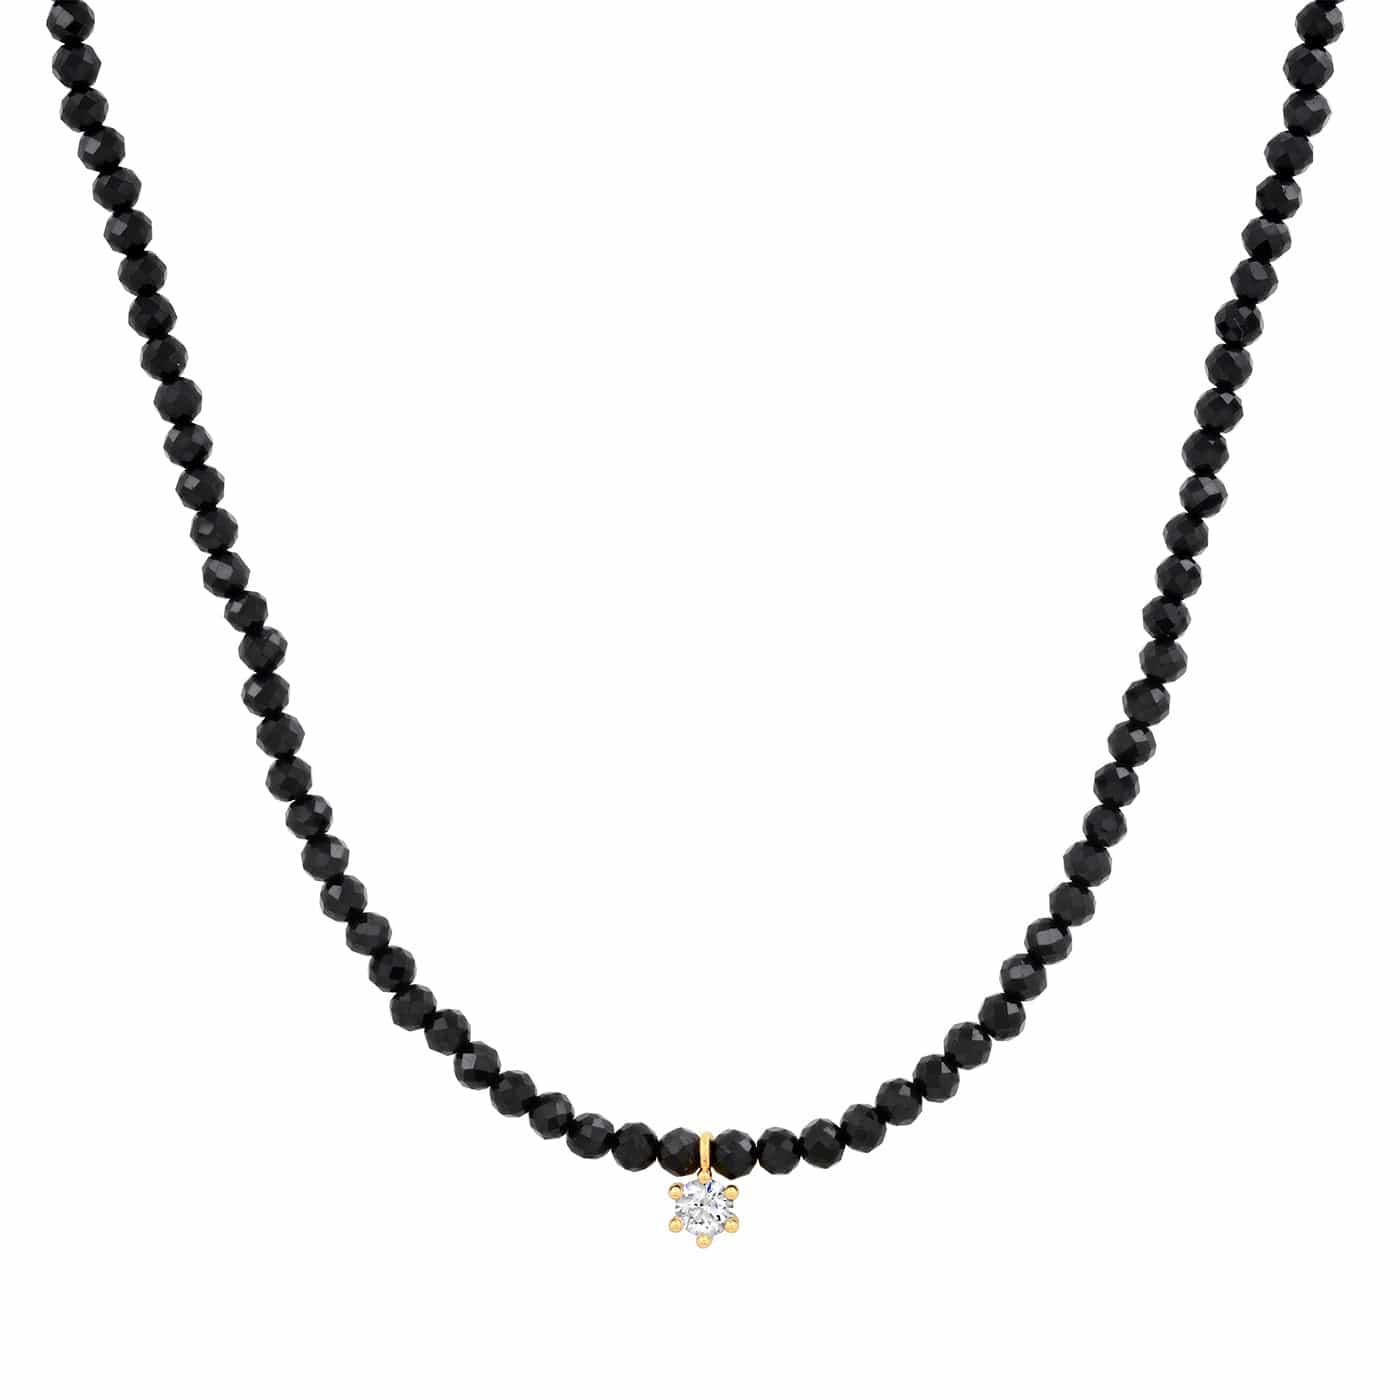 TAI JEWELRY Necklace Black Spinel Necklace with Single CZ Pendant